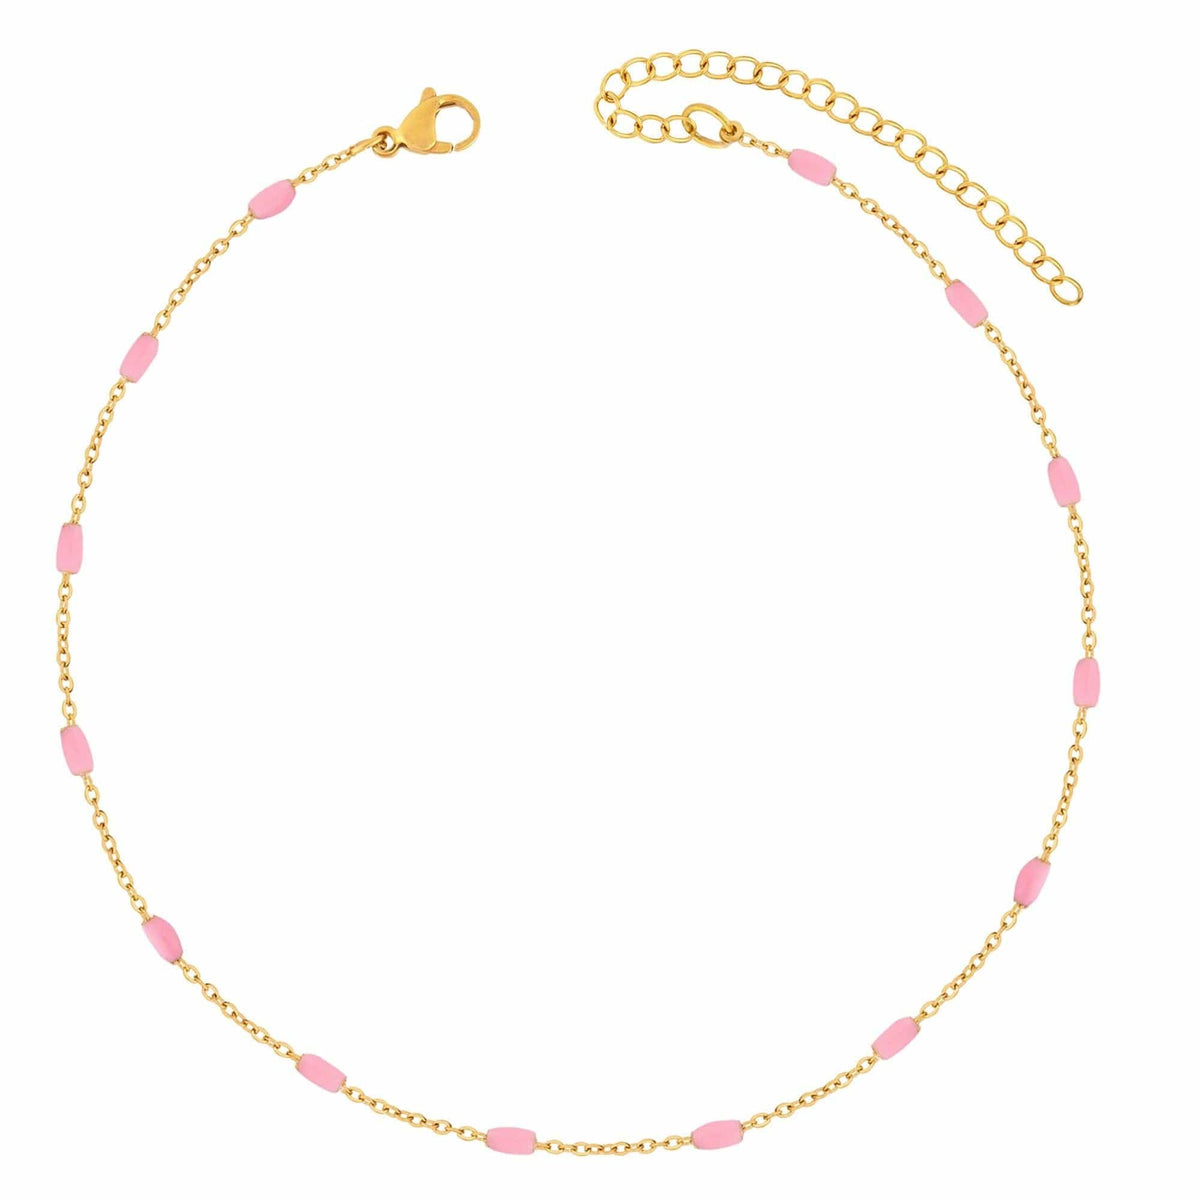 BohoMoon Stainless Steel Seabreeze Belly Chain Gold / Pink / Small